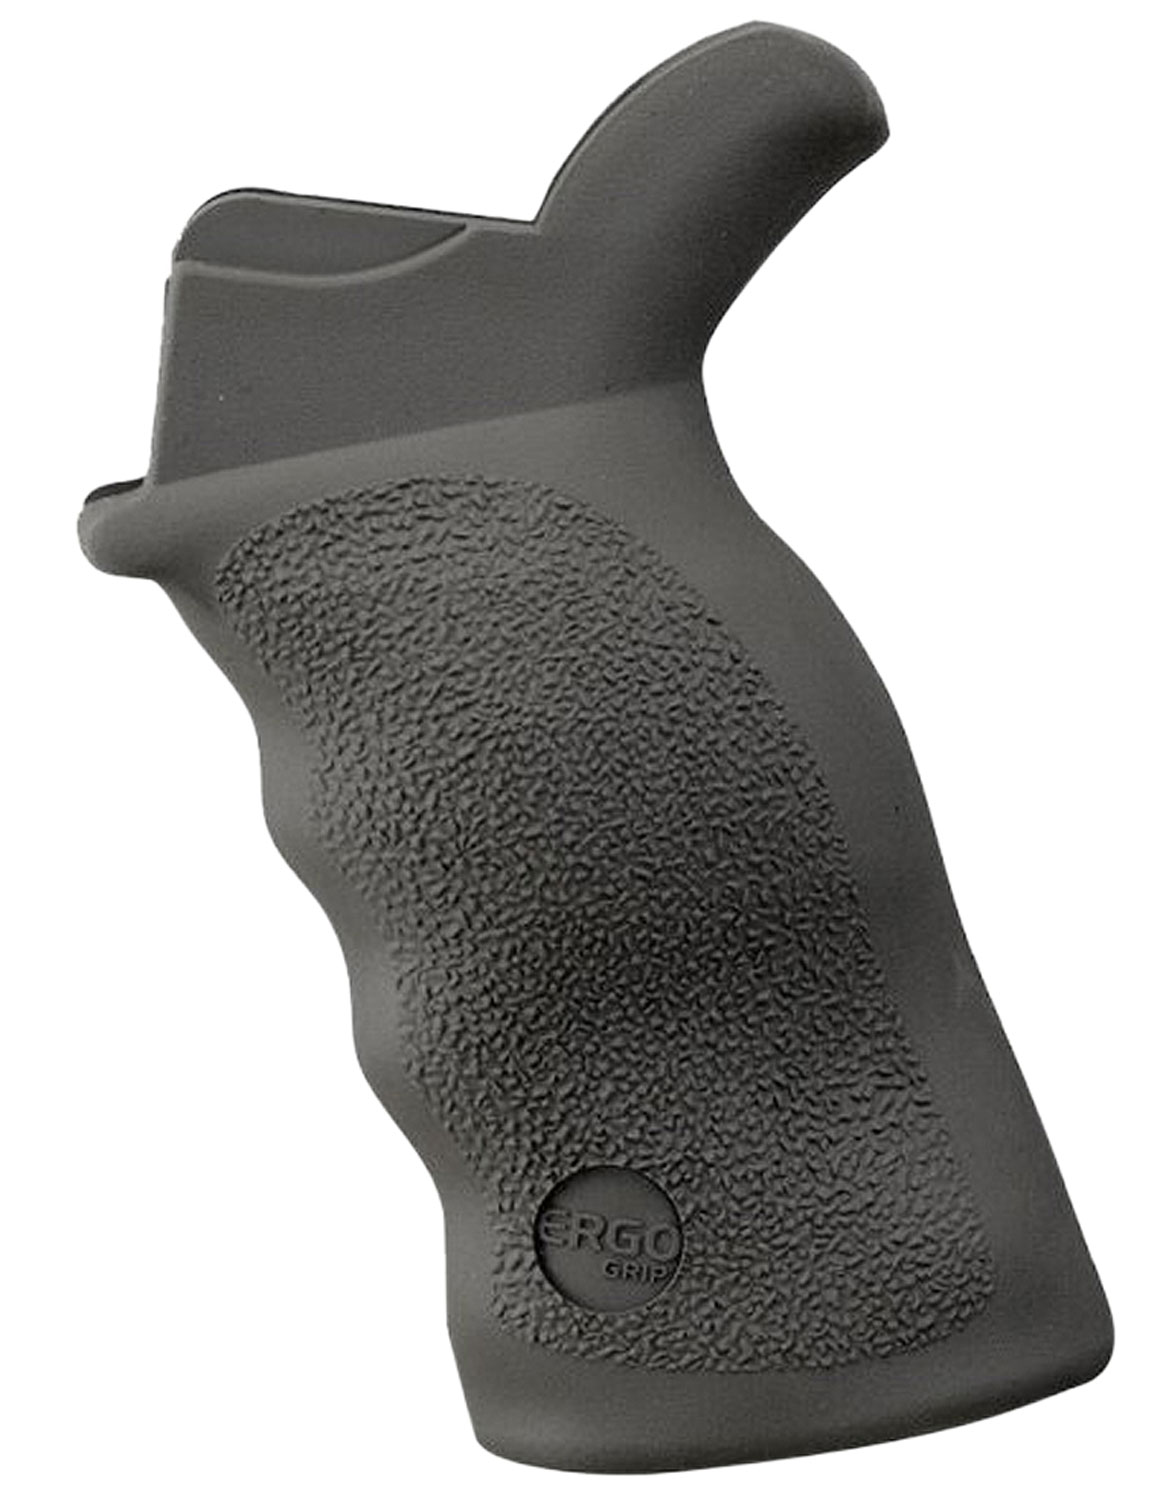 Ergo 4045BK Tactical Deluxe Grip Made of Suregrip Rubber With Black Textured Finish for AR-15, AR-10